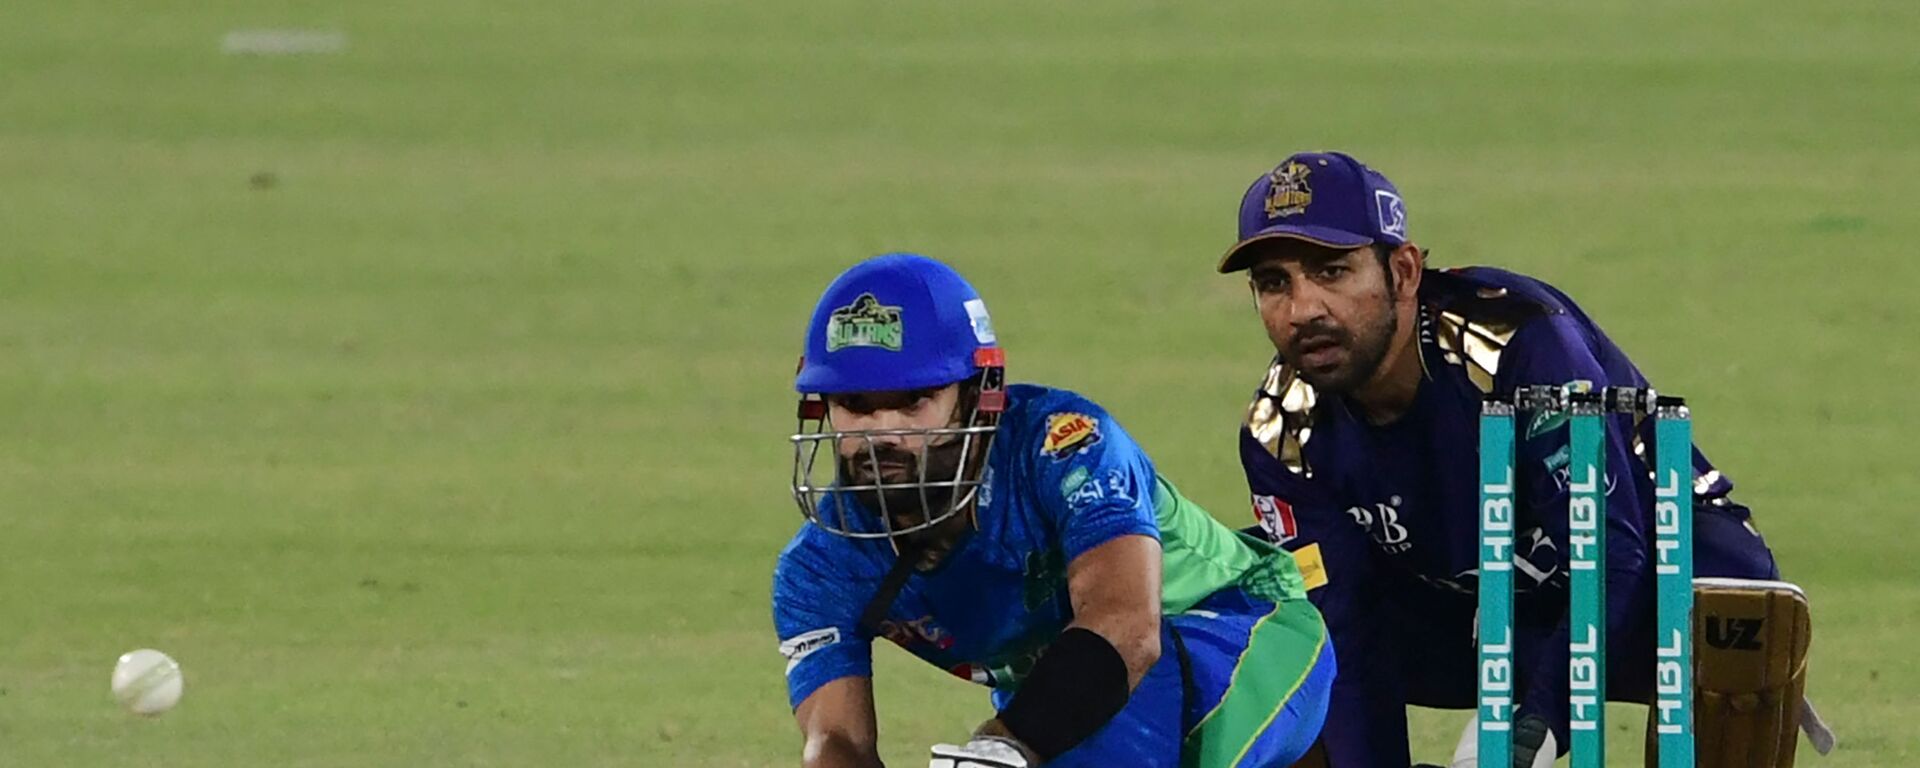 Multan Sultans' Mohammad Rizwan (L) plays a shot during the Pakistan Super League (PSL) T20 cricket match between Quetta Gladiators and Multan Sultans at the National Stadium in Karachi on March 3, 2021 - Sputnik International, 1920, 04.03.2021